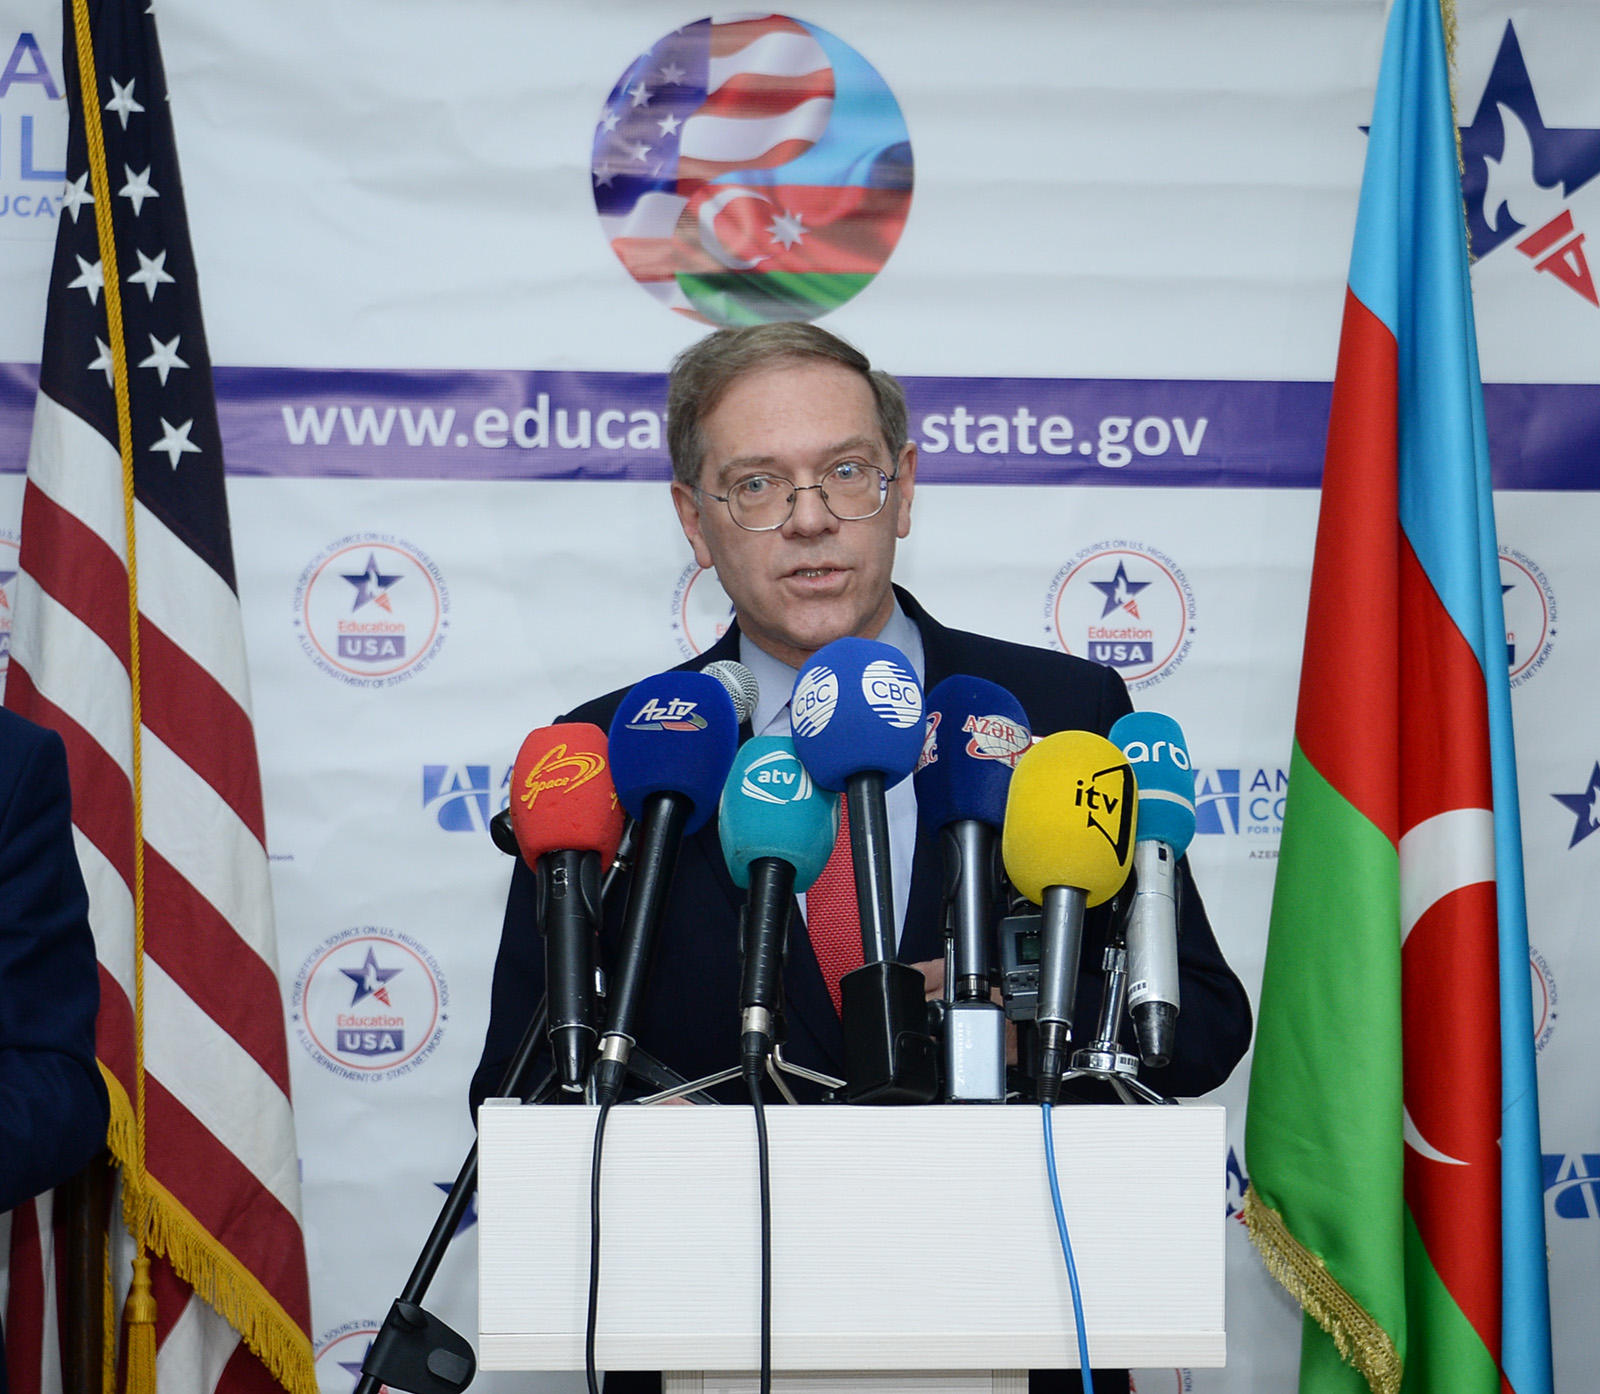 Envoy: US looking forward to continuing dialogue on Karabakh conflict